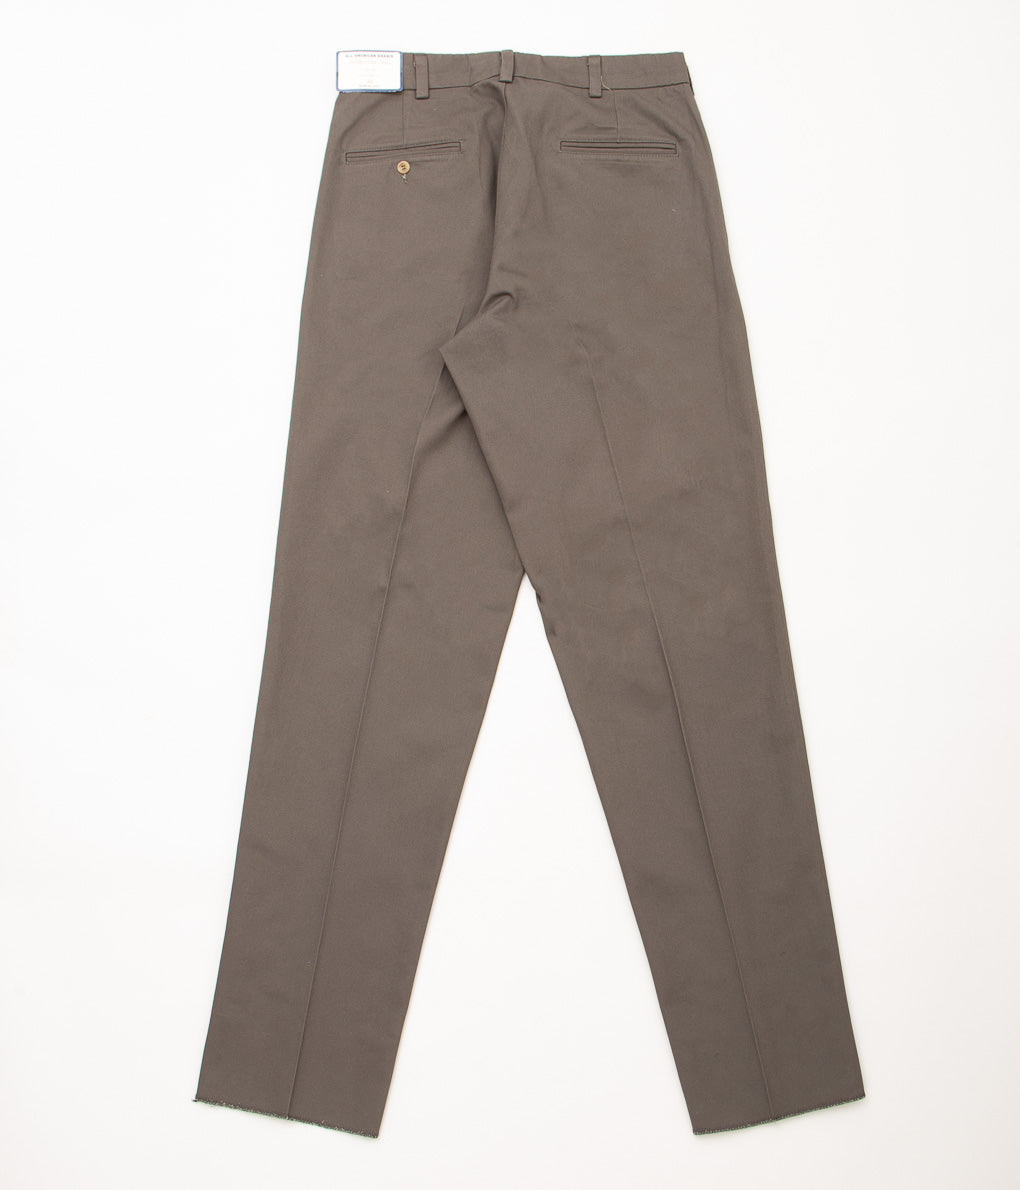 ALL AMERICAN KHAKIS "CRAMERTON TWILL(RELAXED FIT)"(OLIVE)